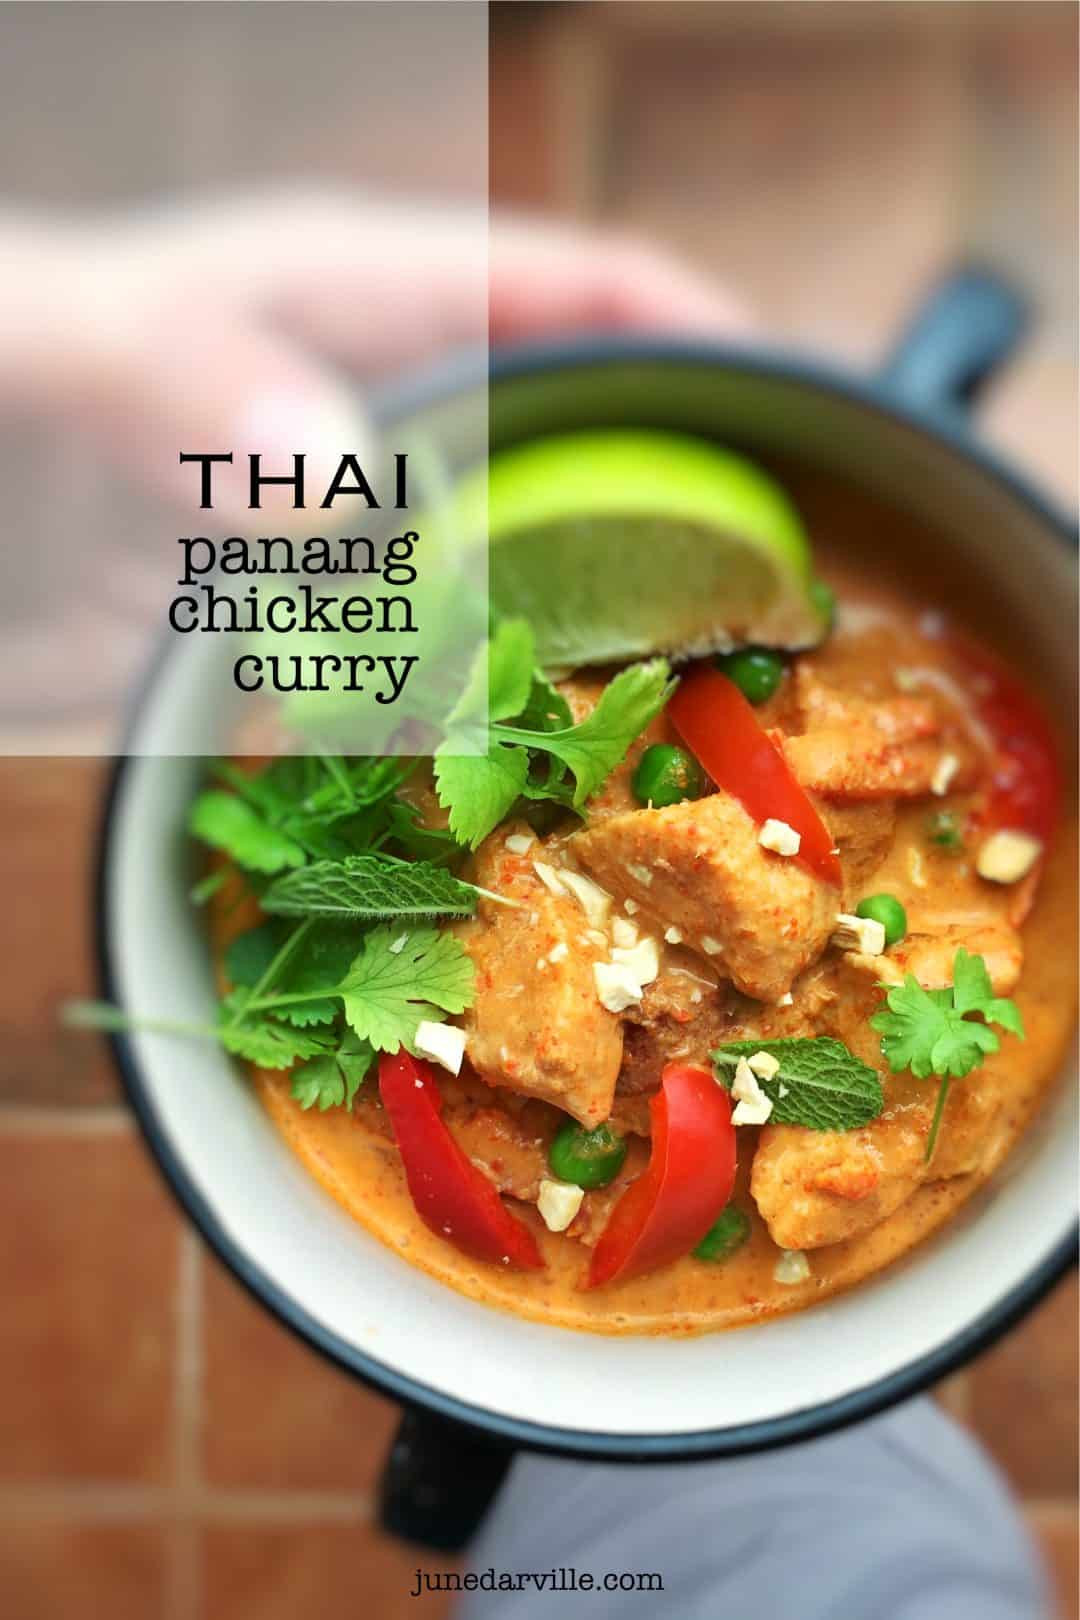 Thai Panang Curry Recipes
 Panang Curry Recipe with Chicken